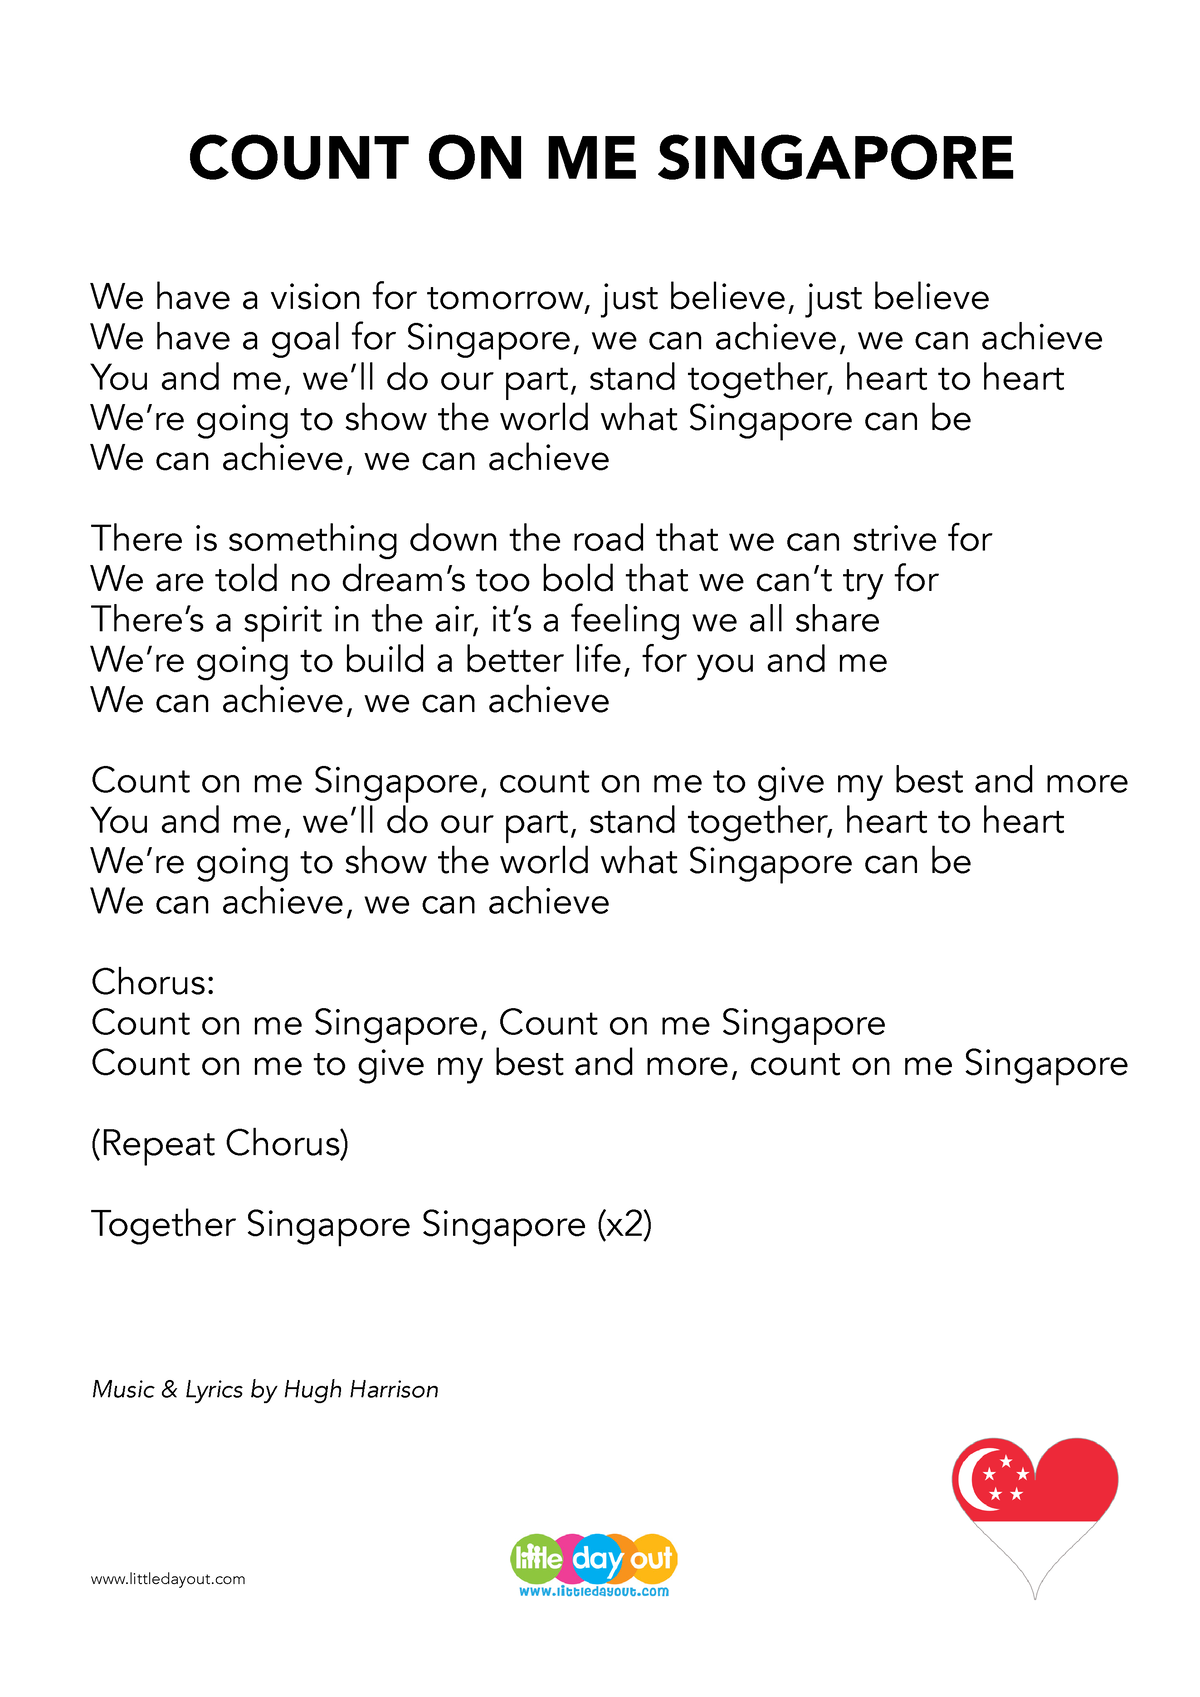 National Day Song Lyrics We have a vision for tomorrow, just believe